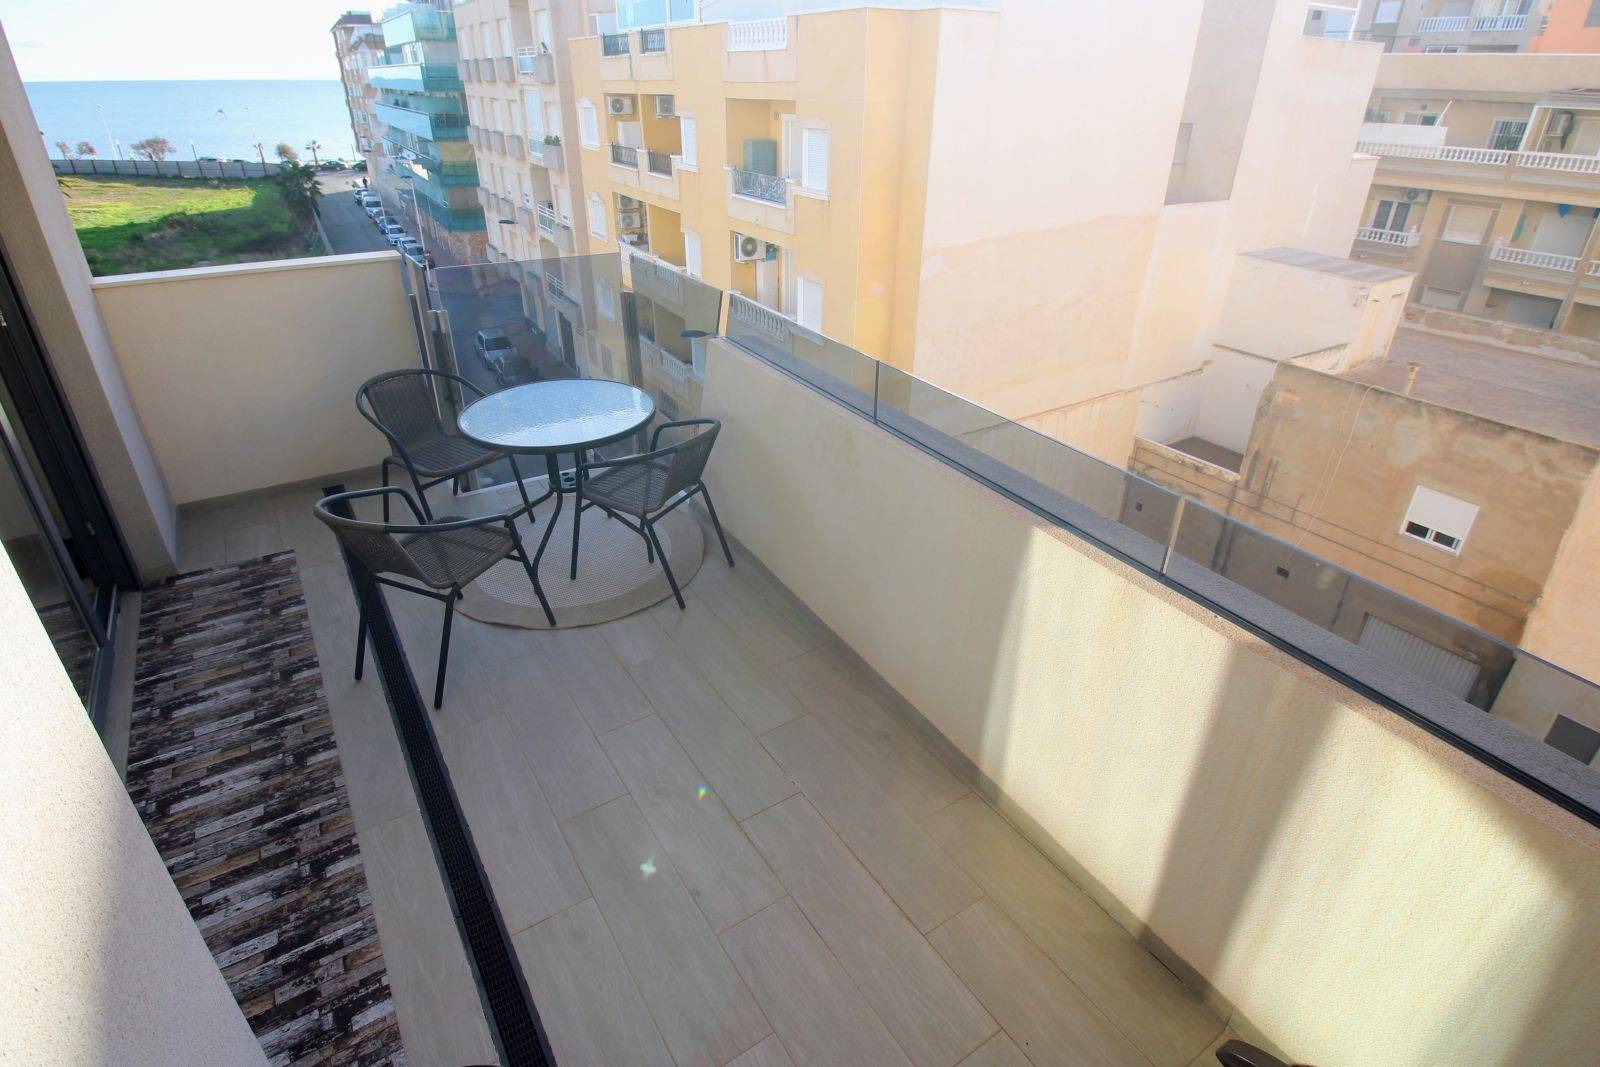 MODERN AND BRIGHT APARTMENT 350 METERS FROM THE BEACHES